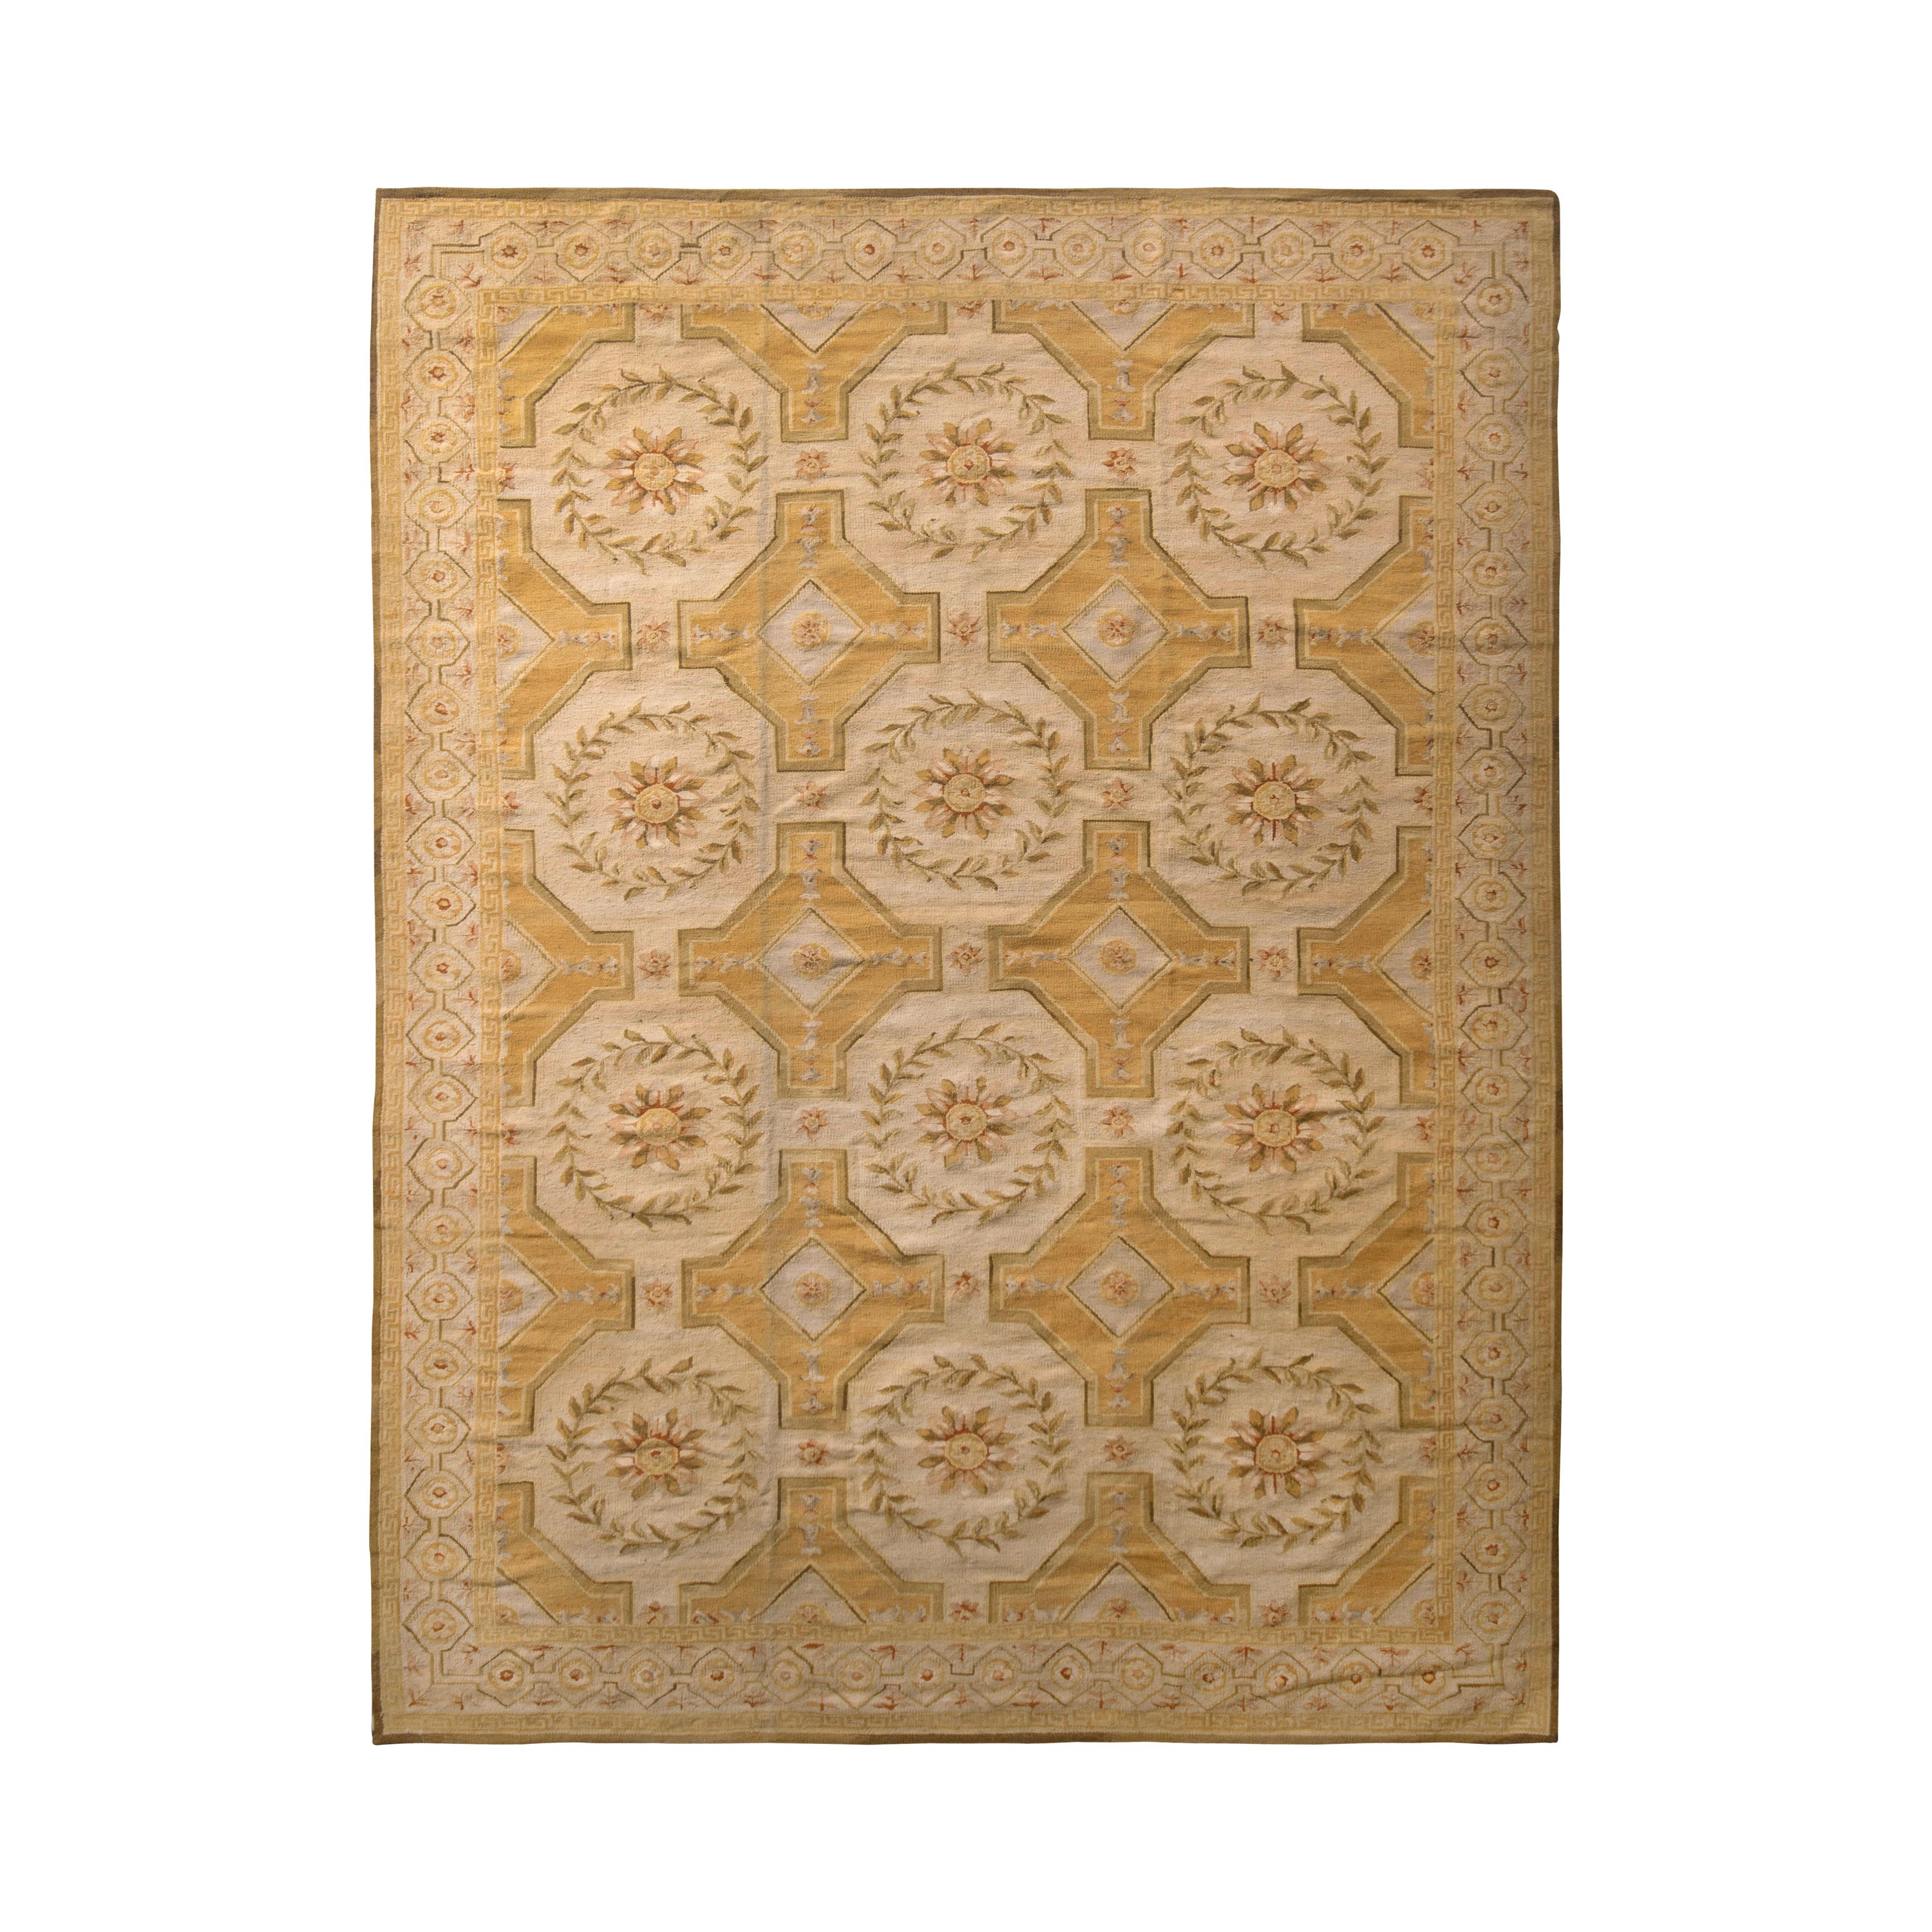 Rug & Kilim's Aubusson Style Flat Weave Beige-Brown Floral Pattern